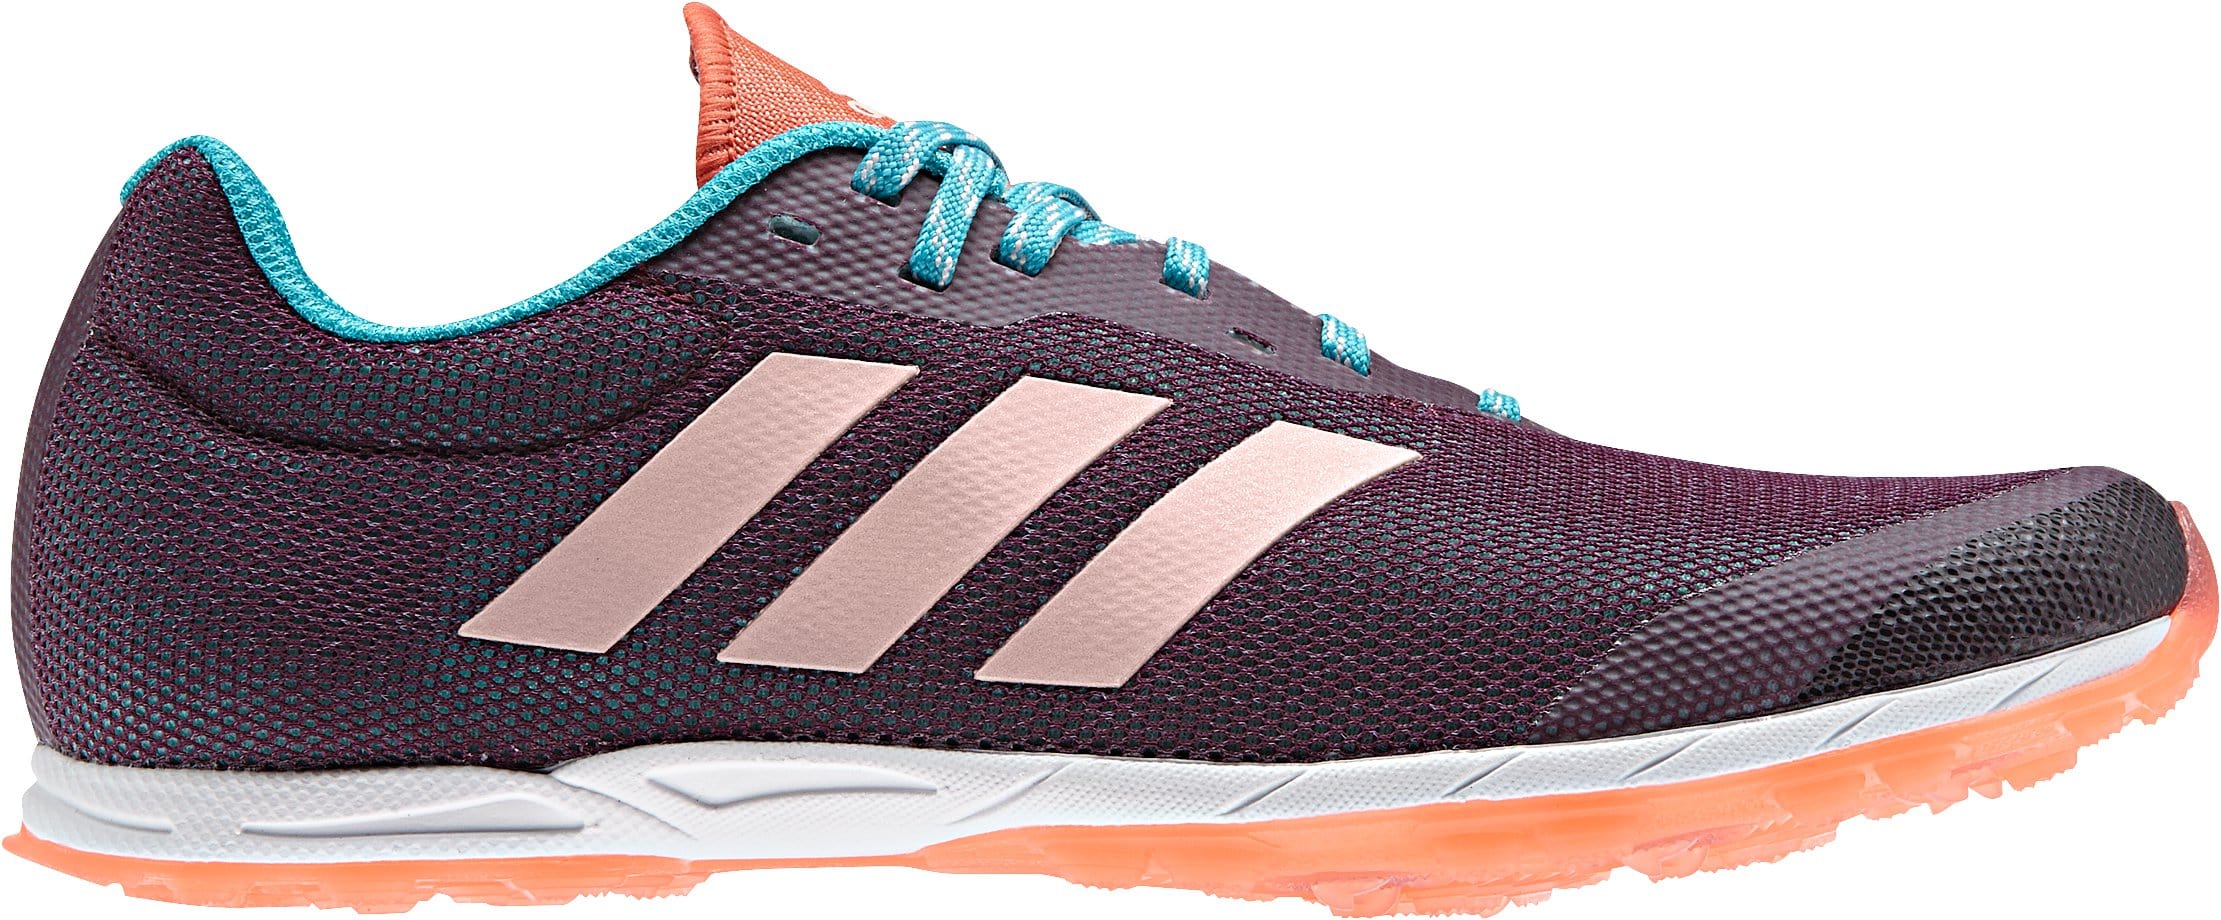 adidas x country femme